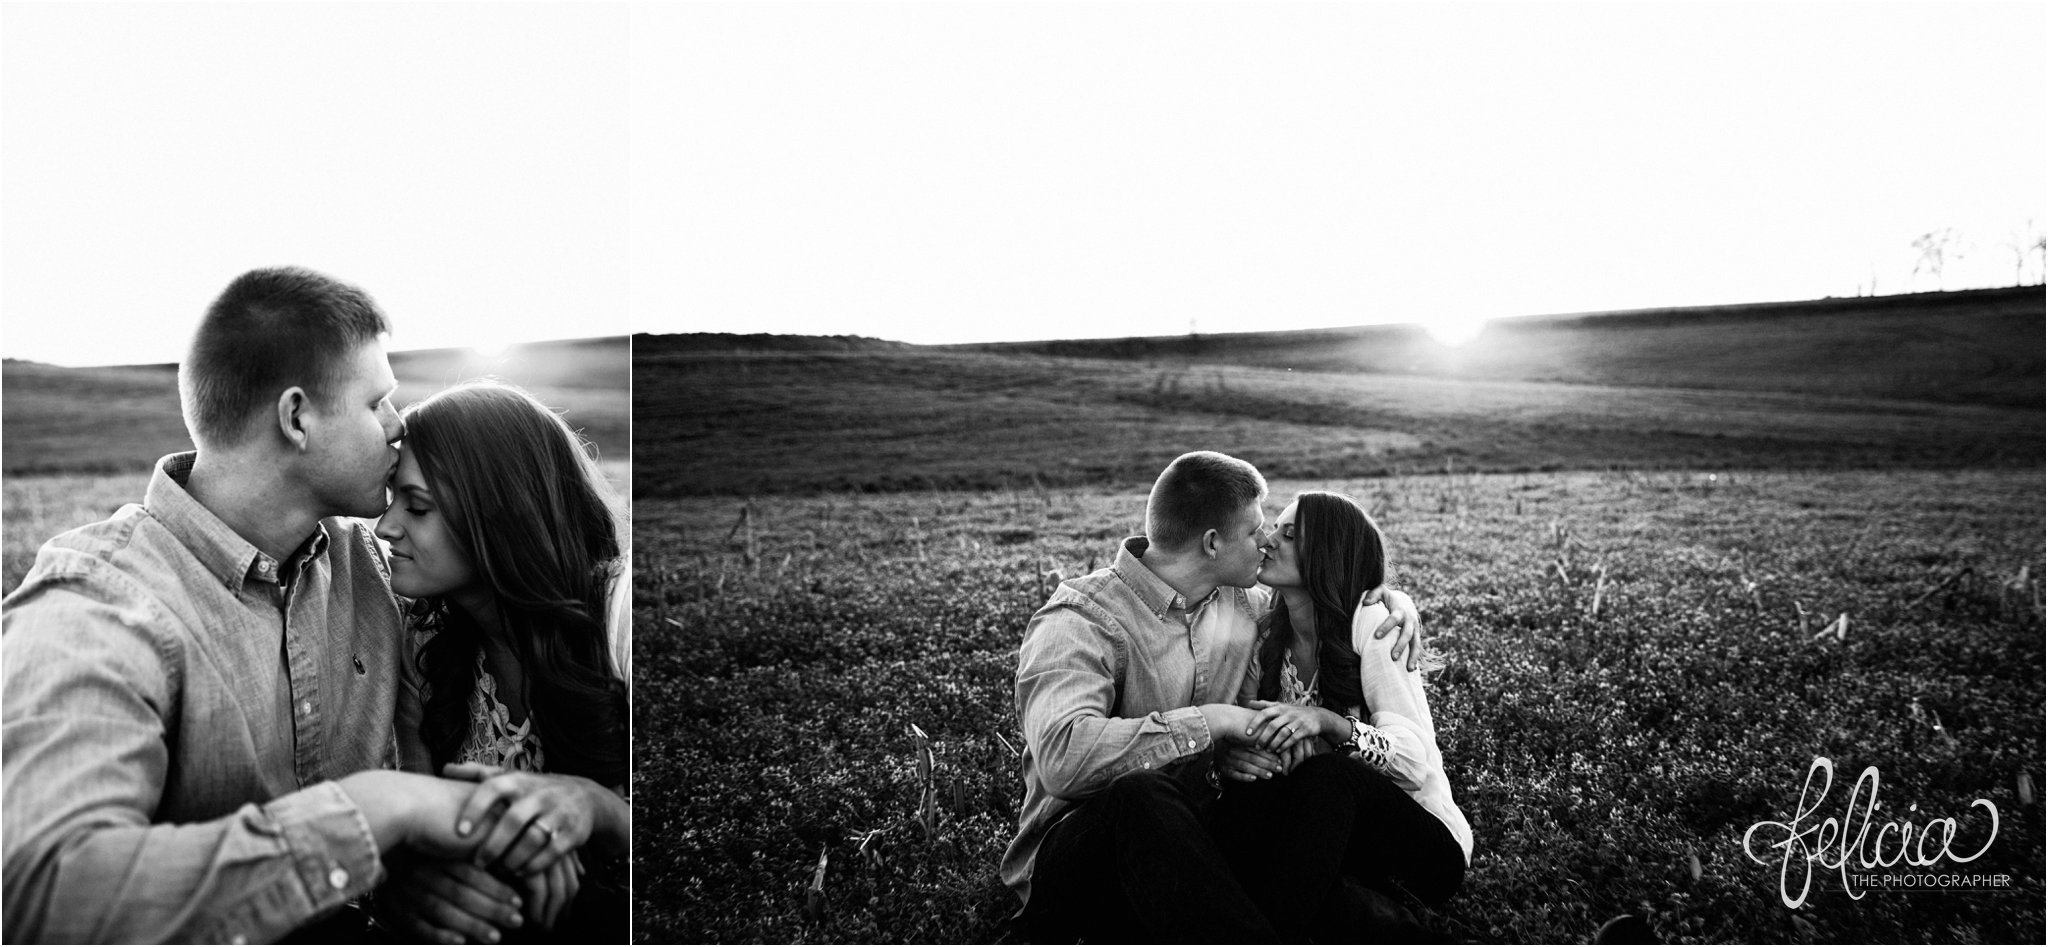 Romantic Engagement Photography | Kansas City, MO | Black and White Kissing in Field at Sunset | Images by www.feliciathephotographer.com